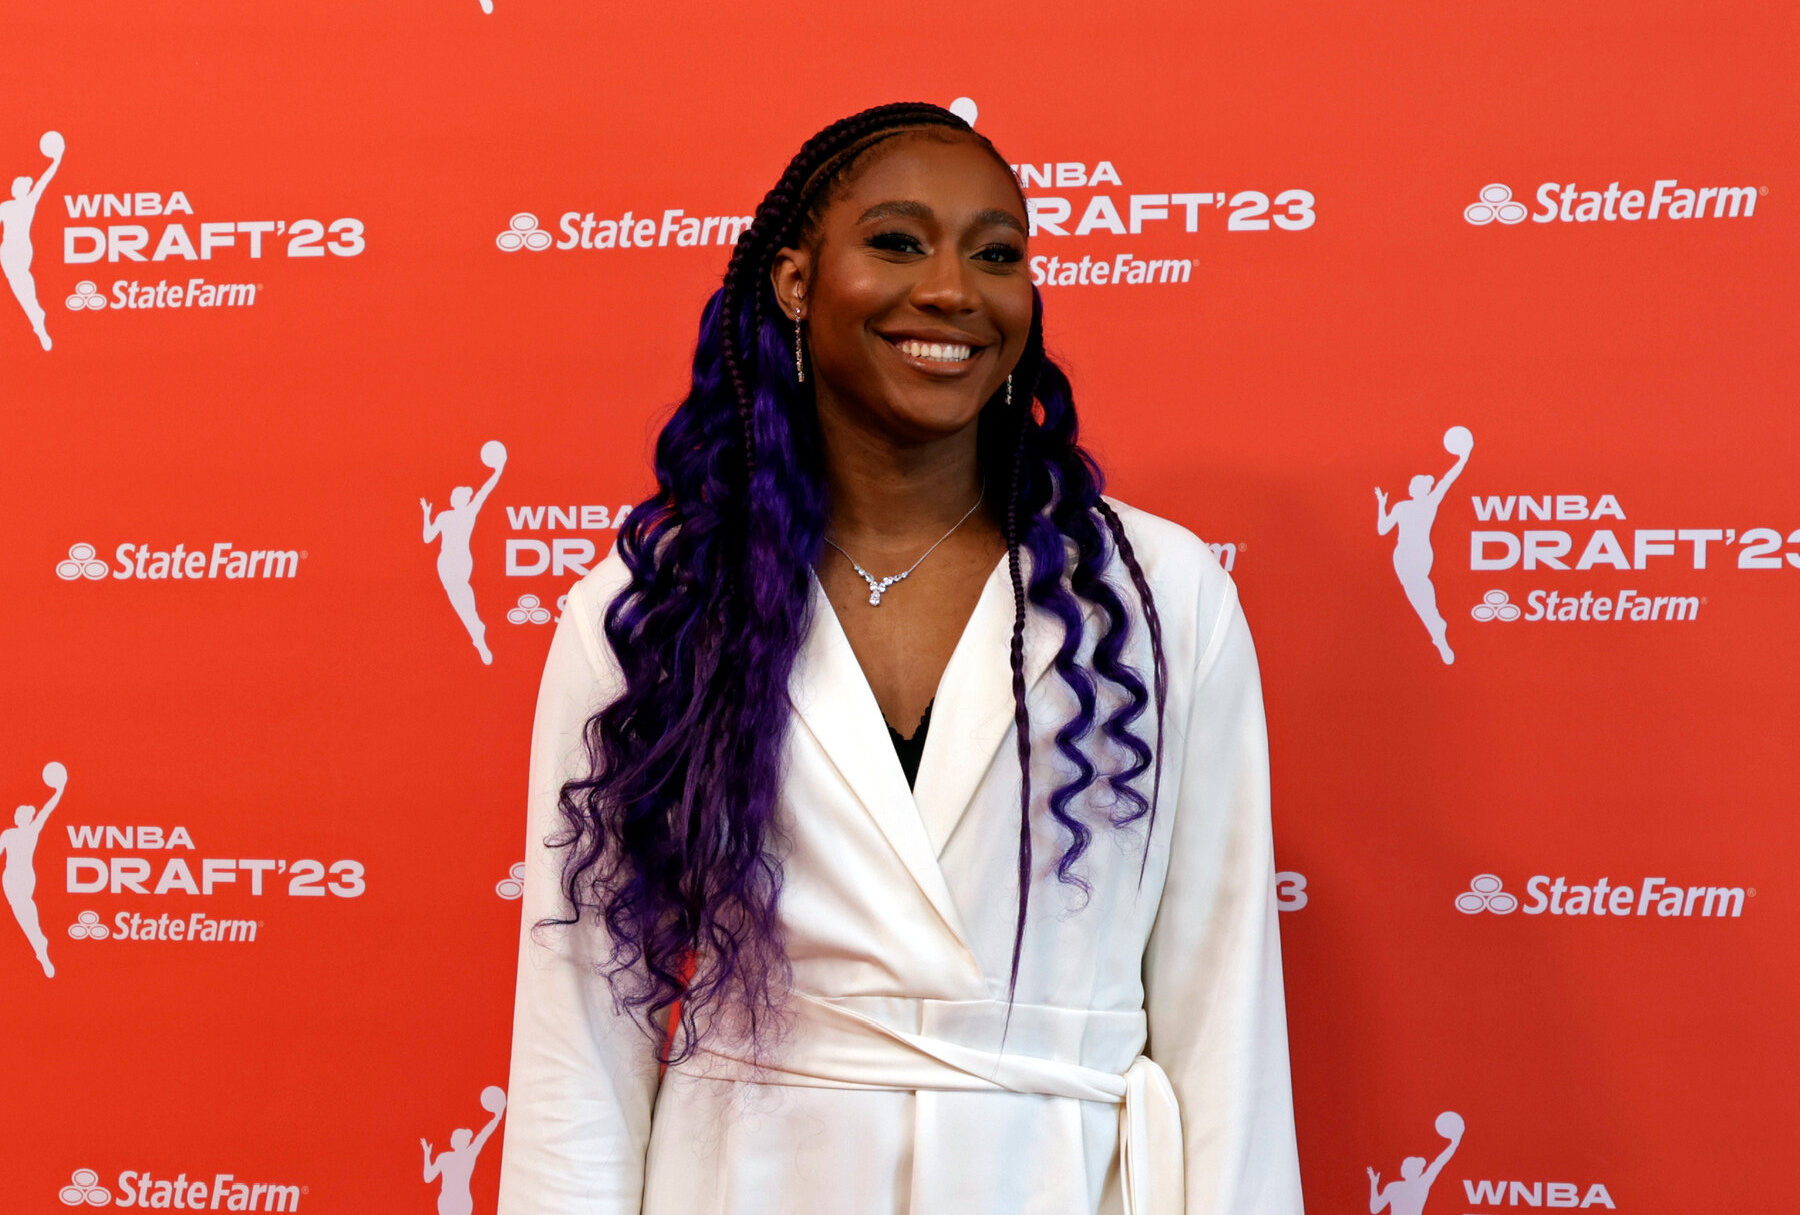 Aliyah Boston Selected No. 1 Pick in WNBA Draft by Indiana Fever